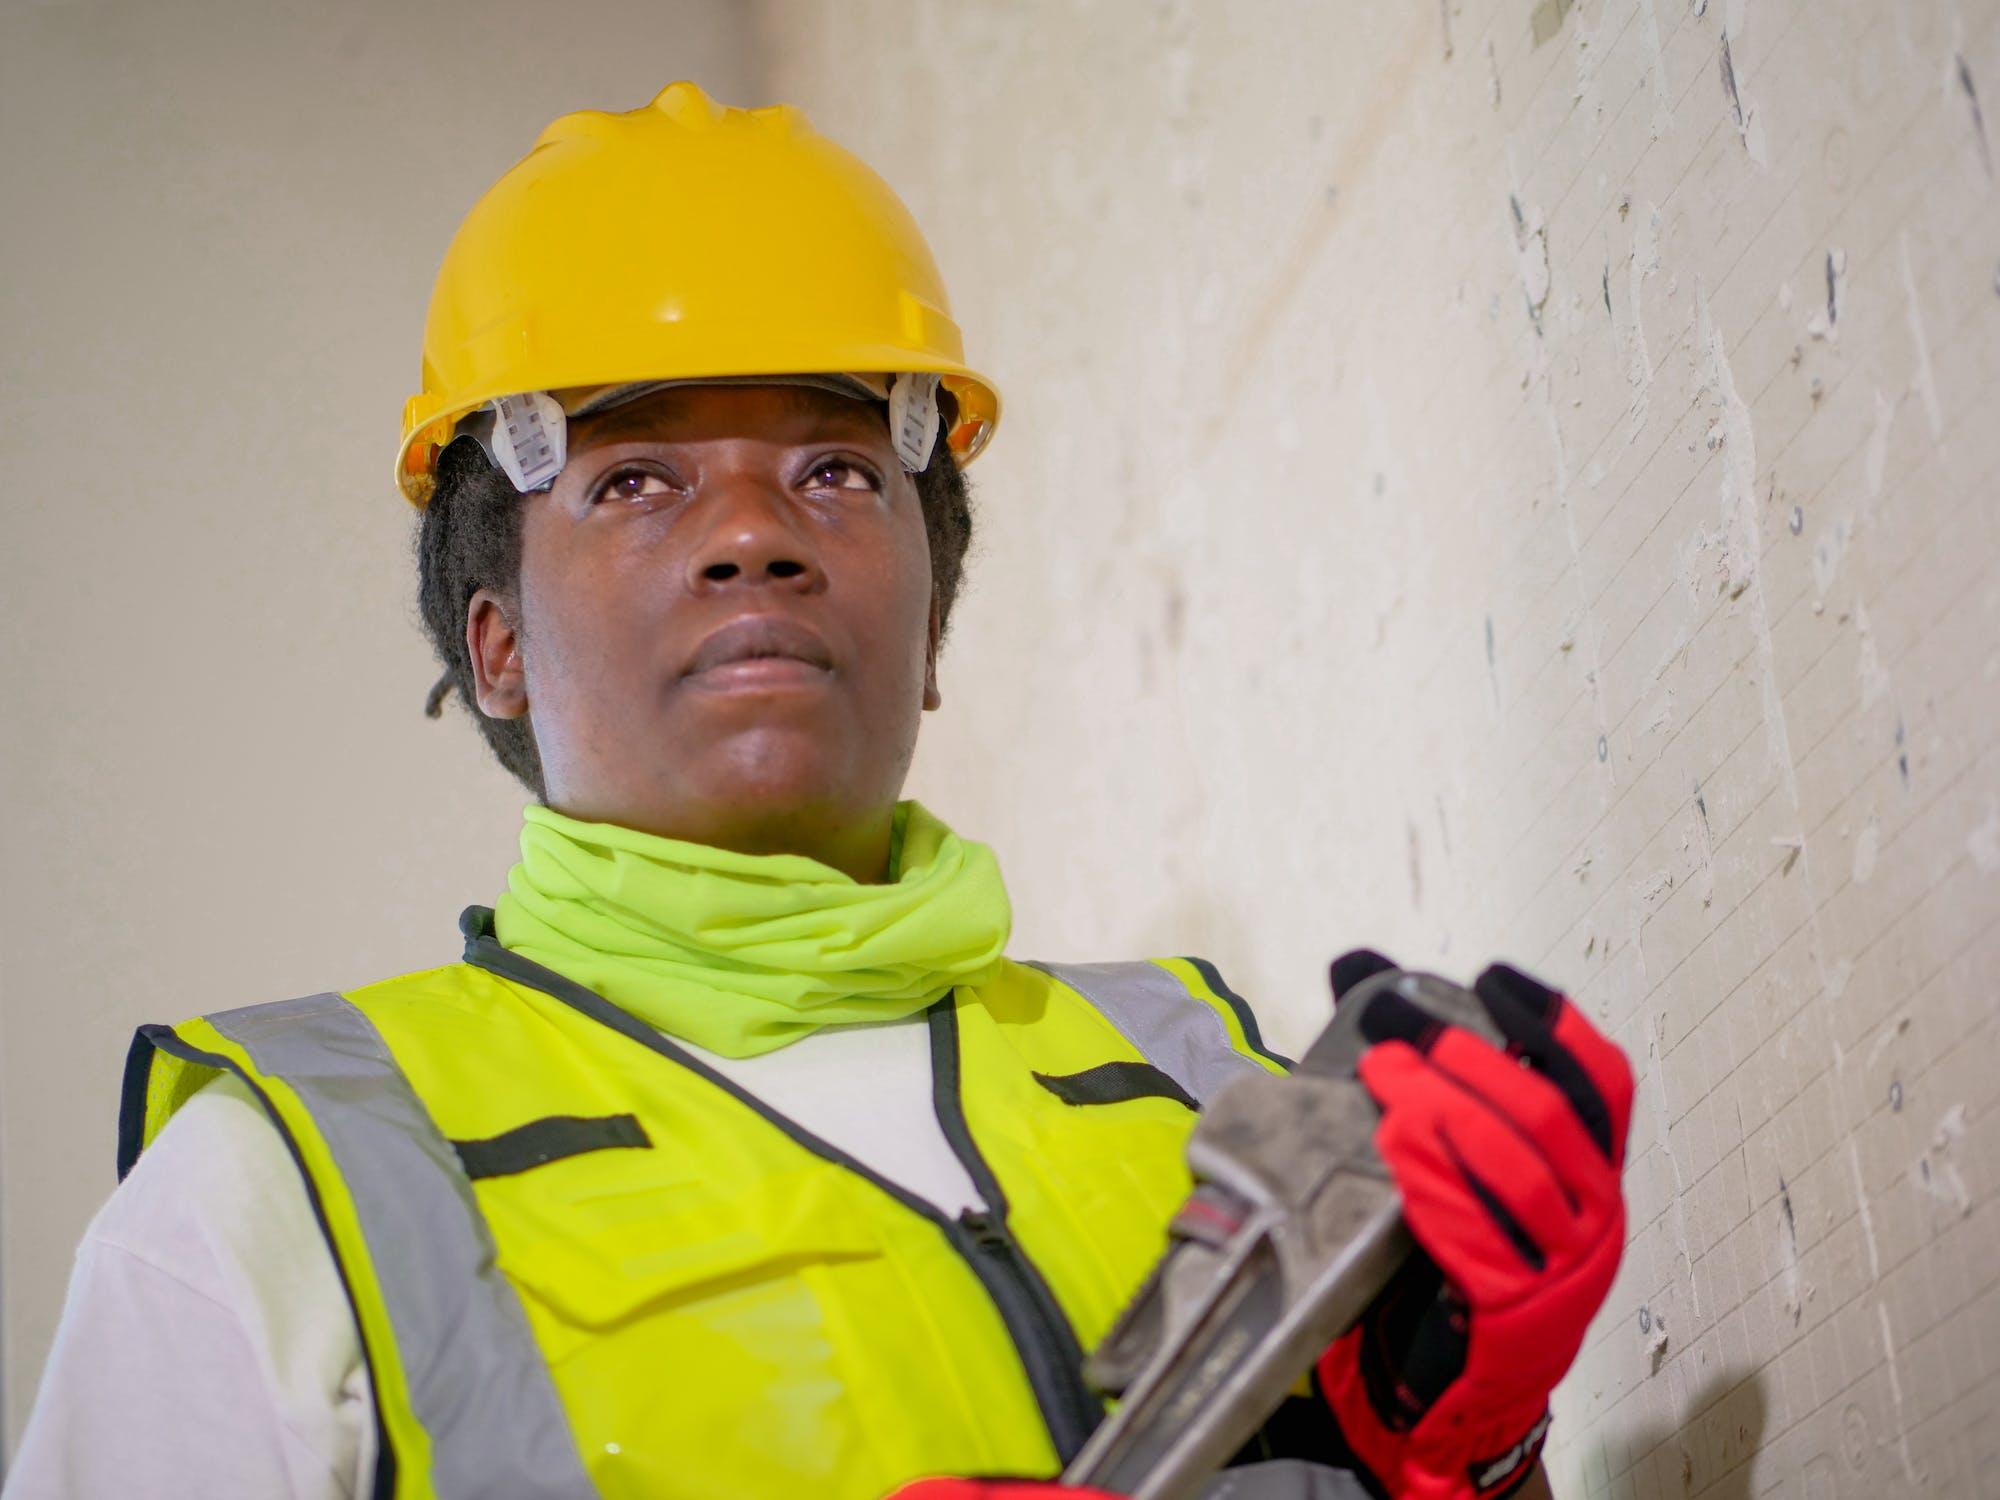 A construction worker learning a trade, wearing a hard hat and safety vest.